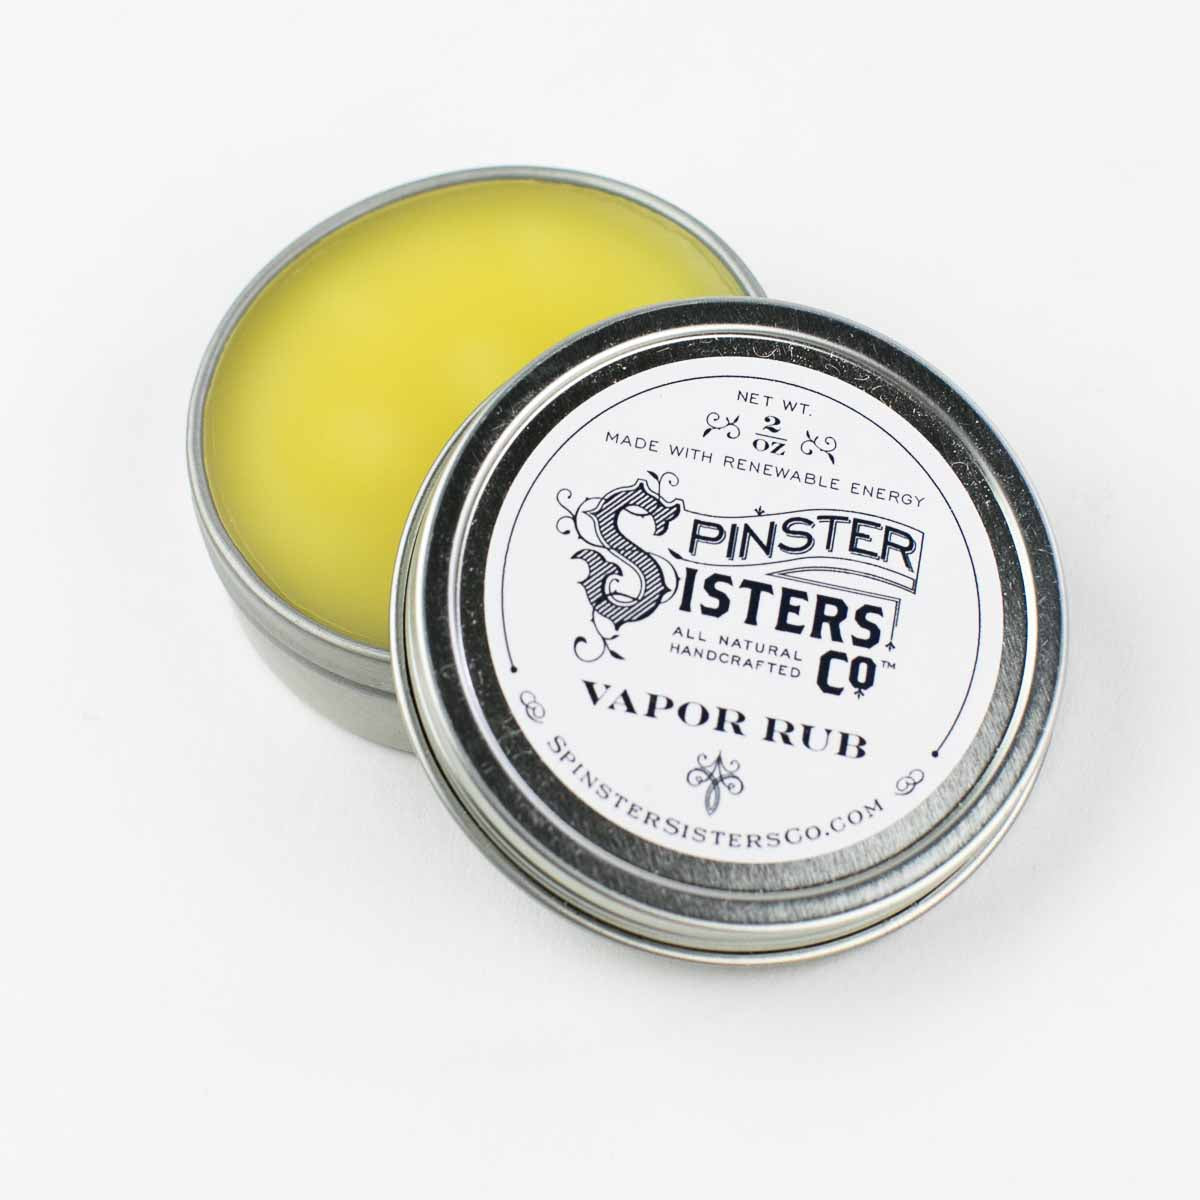 A round tin of Spinster Sisters Vapor Rub, open to show yellow balm, with the lid next to it displaying the Spinster Sisters, Co. logo and information on a white background.